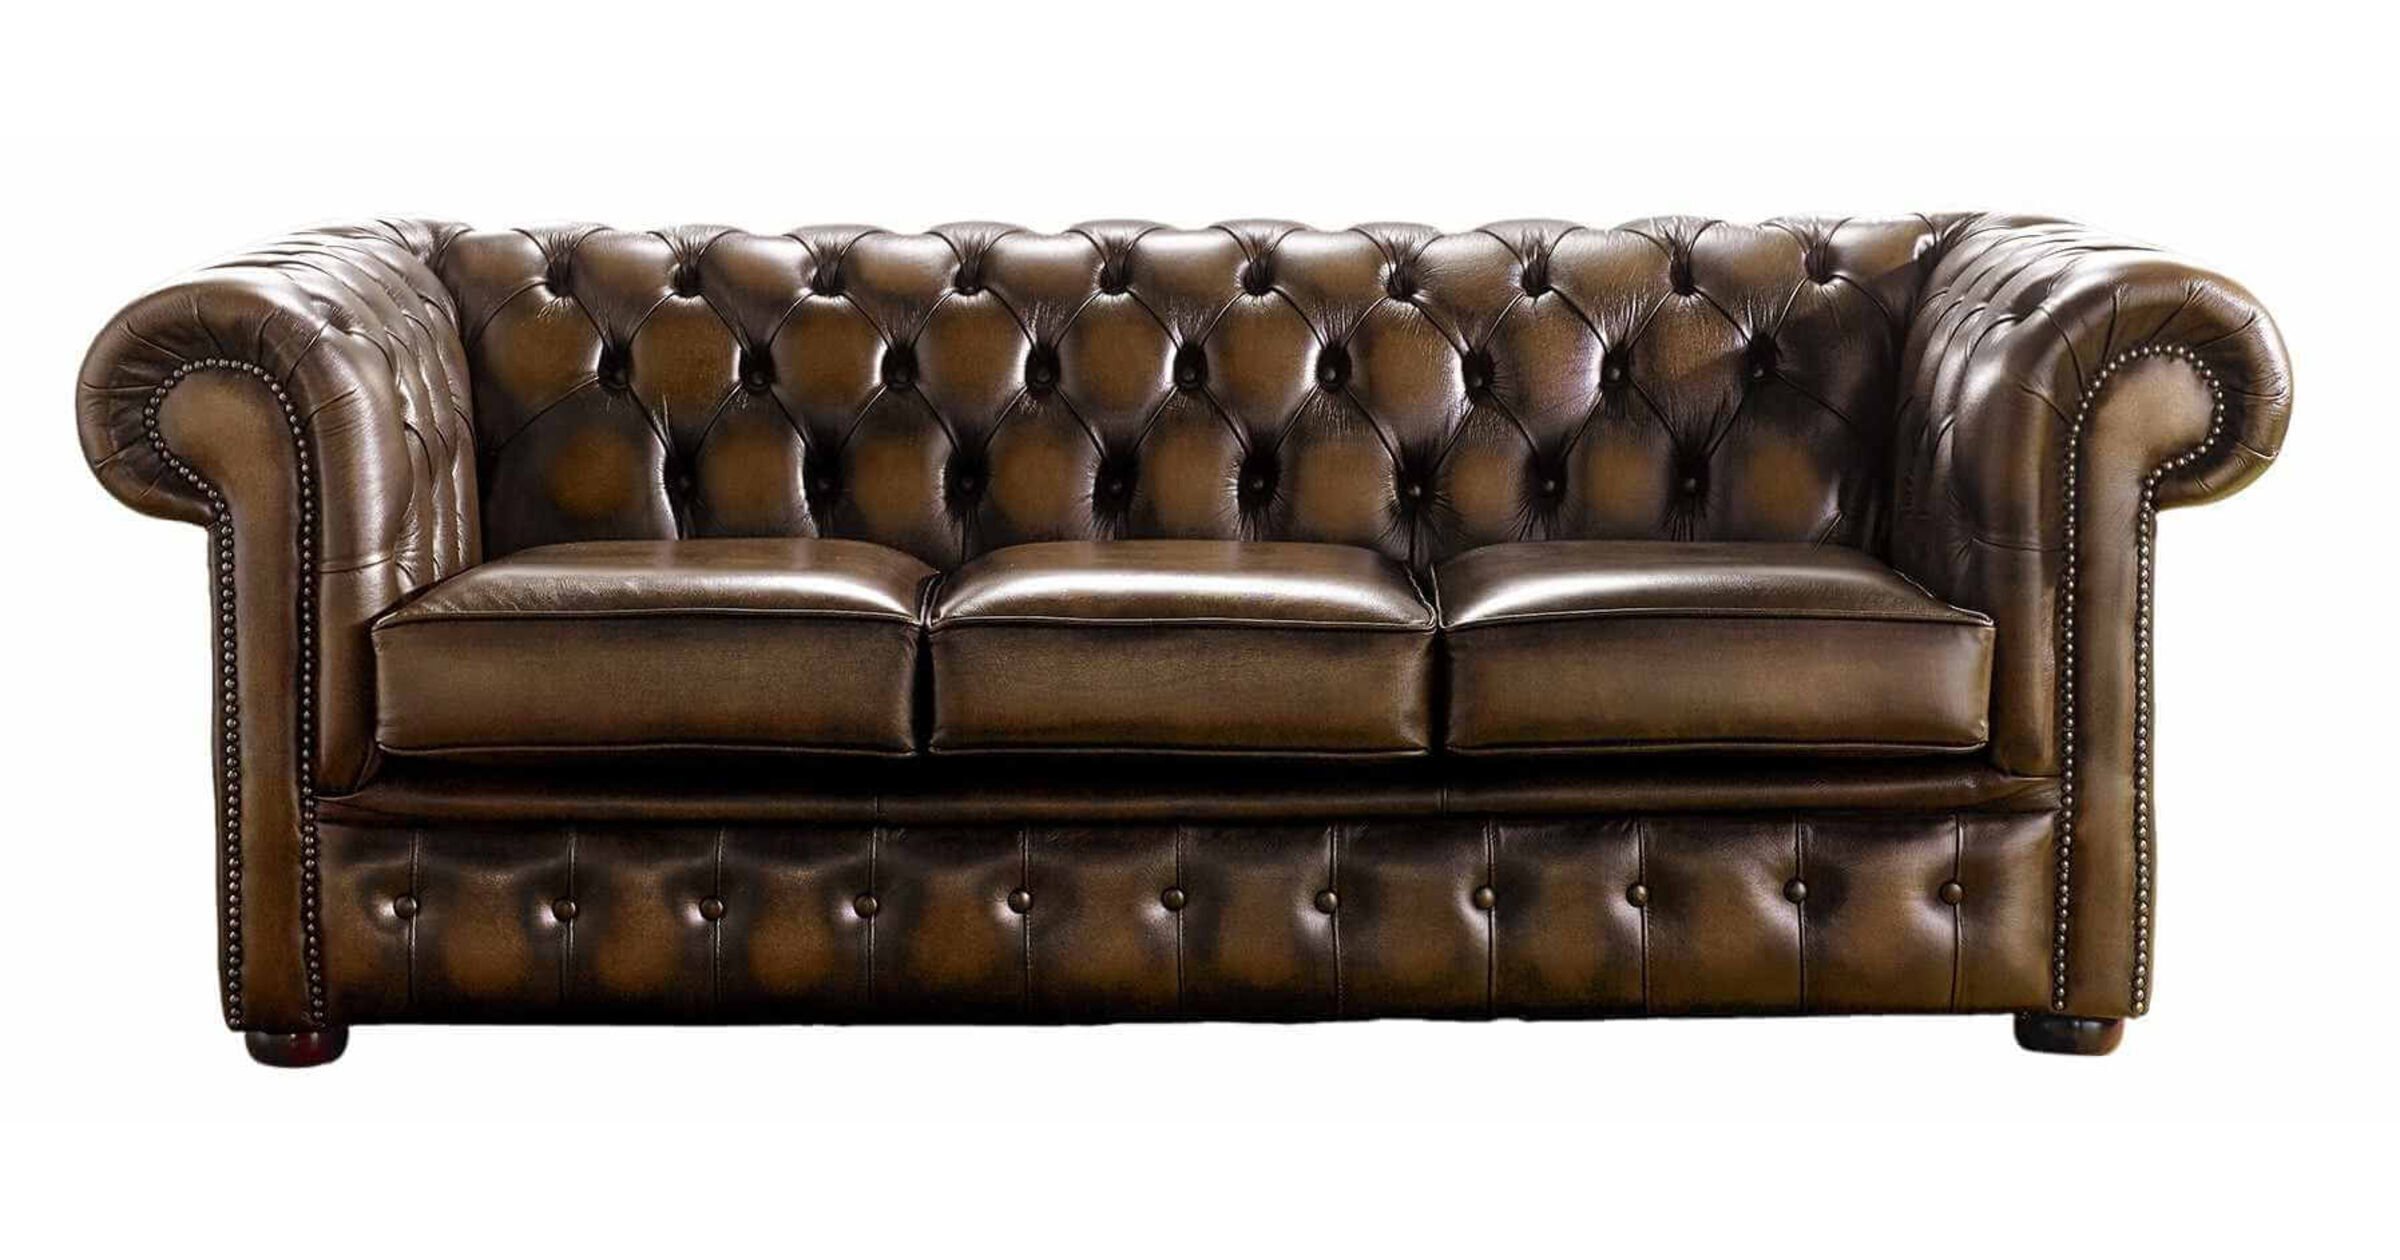 Experience True Comfort with Handmade Chesterfield 3 Seater Sofa